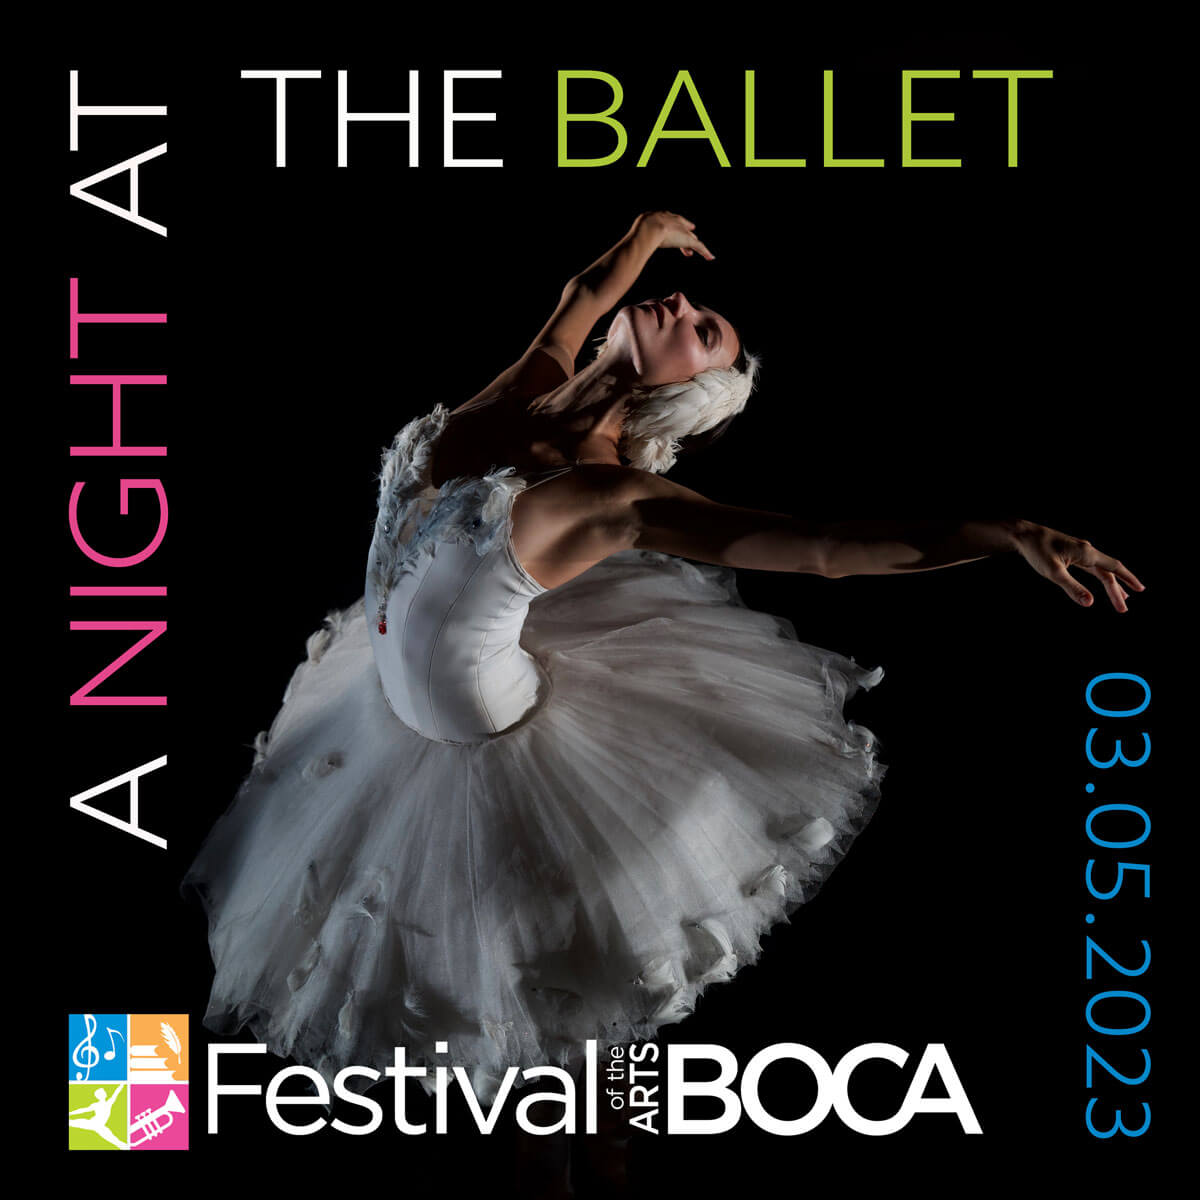 Ballet flyer for the Festival of the Arts in Boca Raton